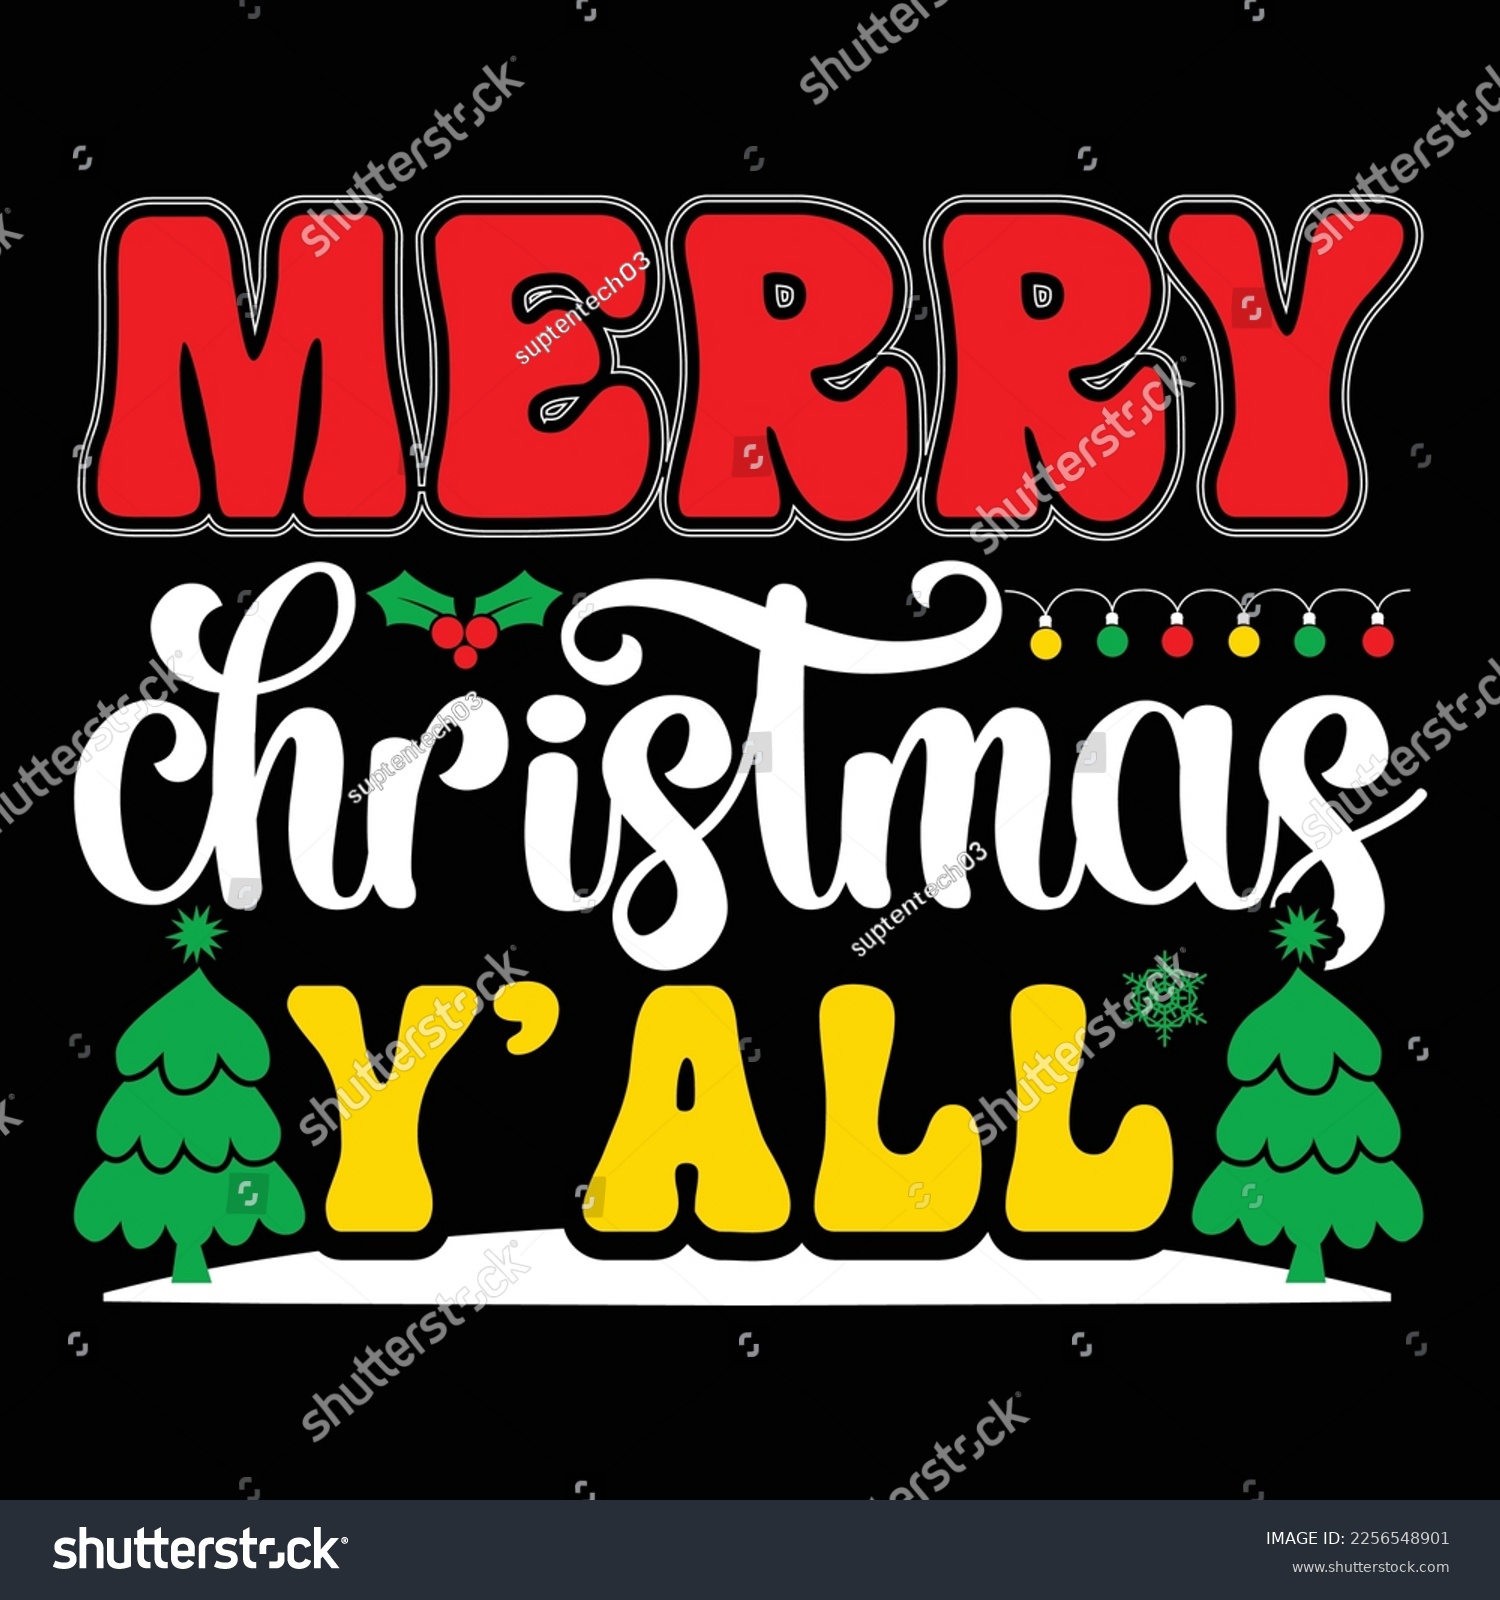 SVG of Merry Christmas Y' All, Merry Christmas shirts Print Template, Xmas Ugly Snow Santa Clouse New Year Holiday Candy Santa Hat vector illustration for Christmas hand lettered svg